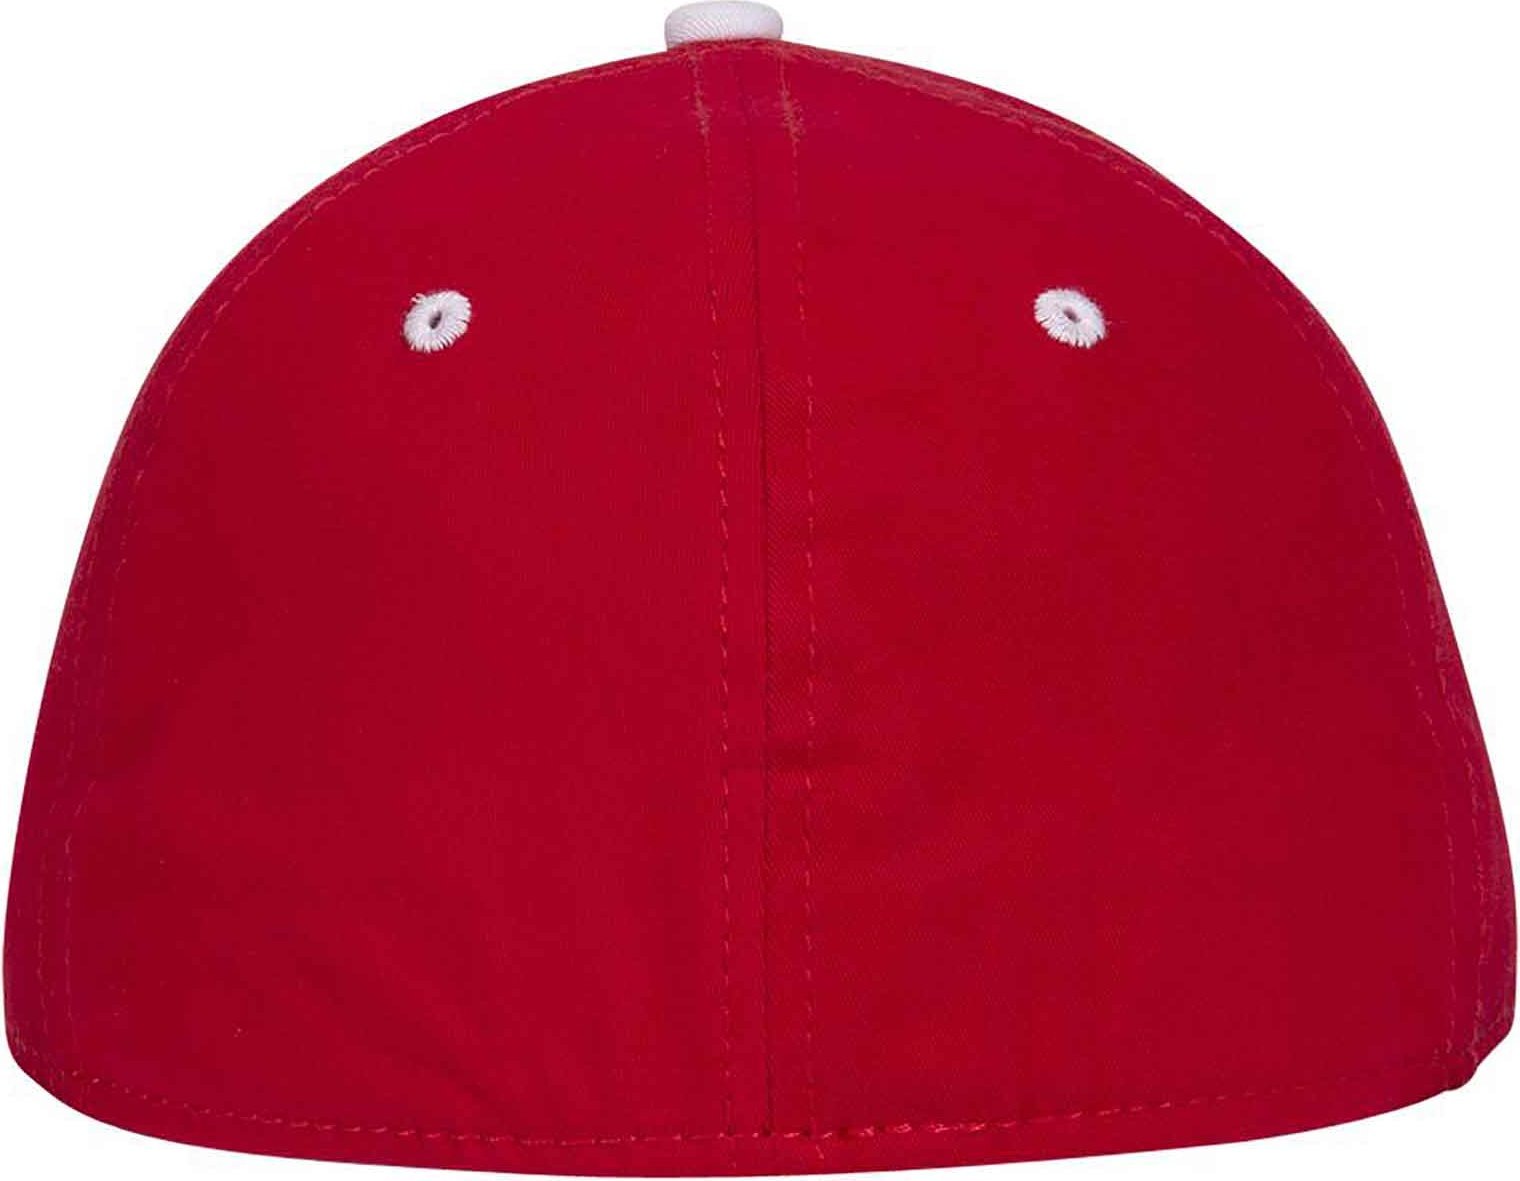 OTTO 12-267 Stretchable Deluxe Brushed Cotton Twill Sandwich Visor Low Profile Pro Style Cap S/M - Red Red White - HIT a Double - 1